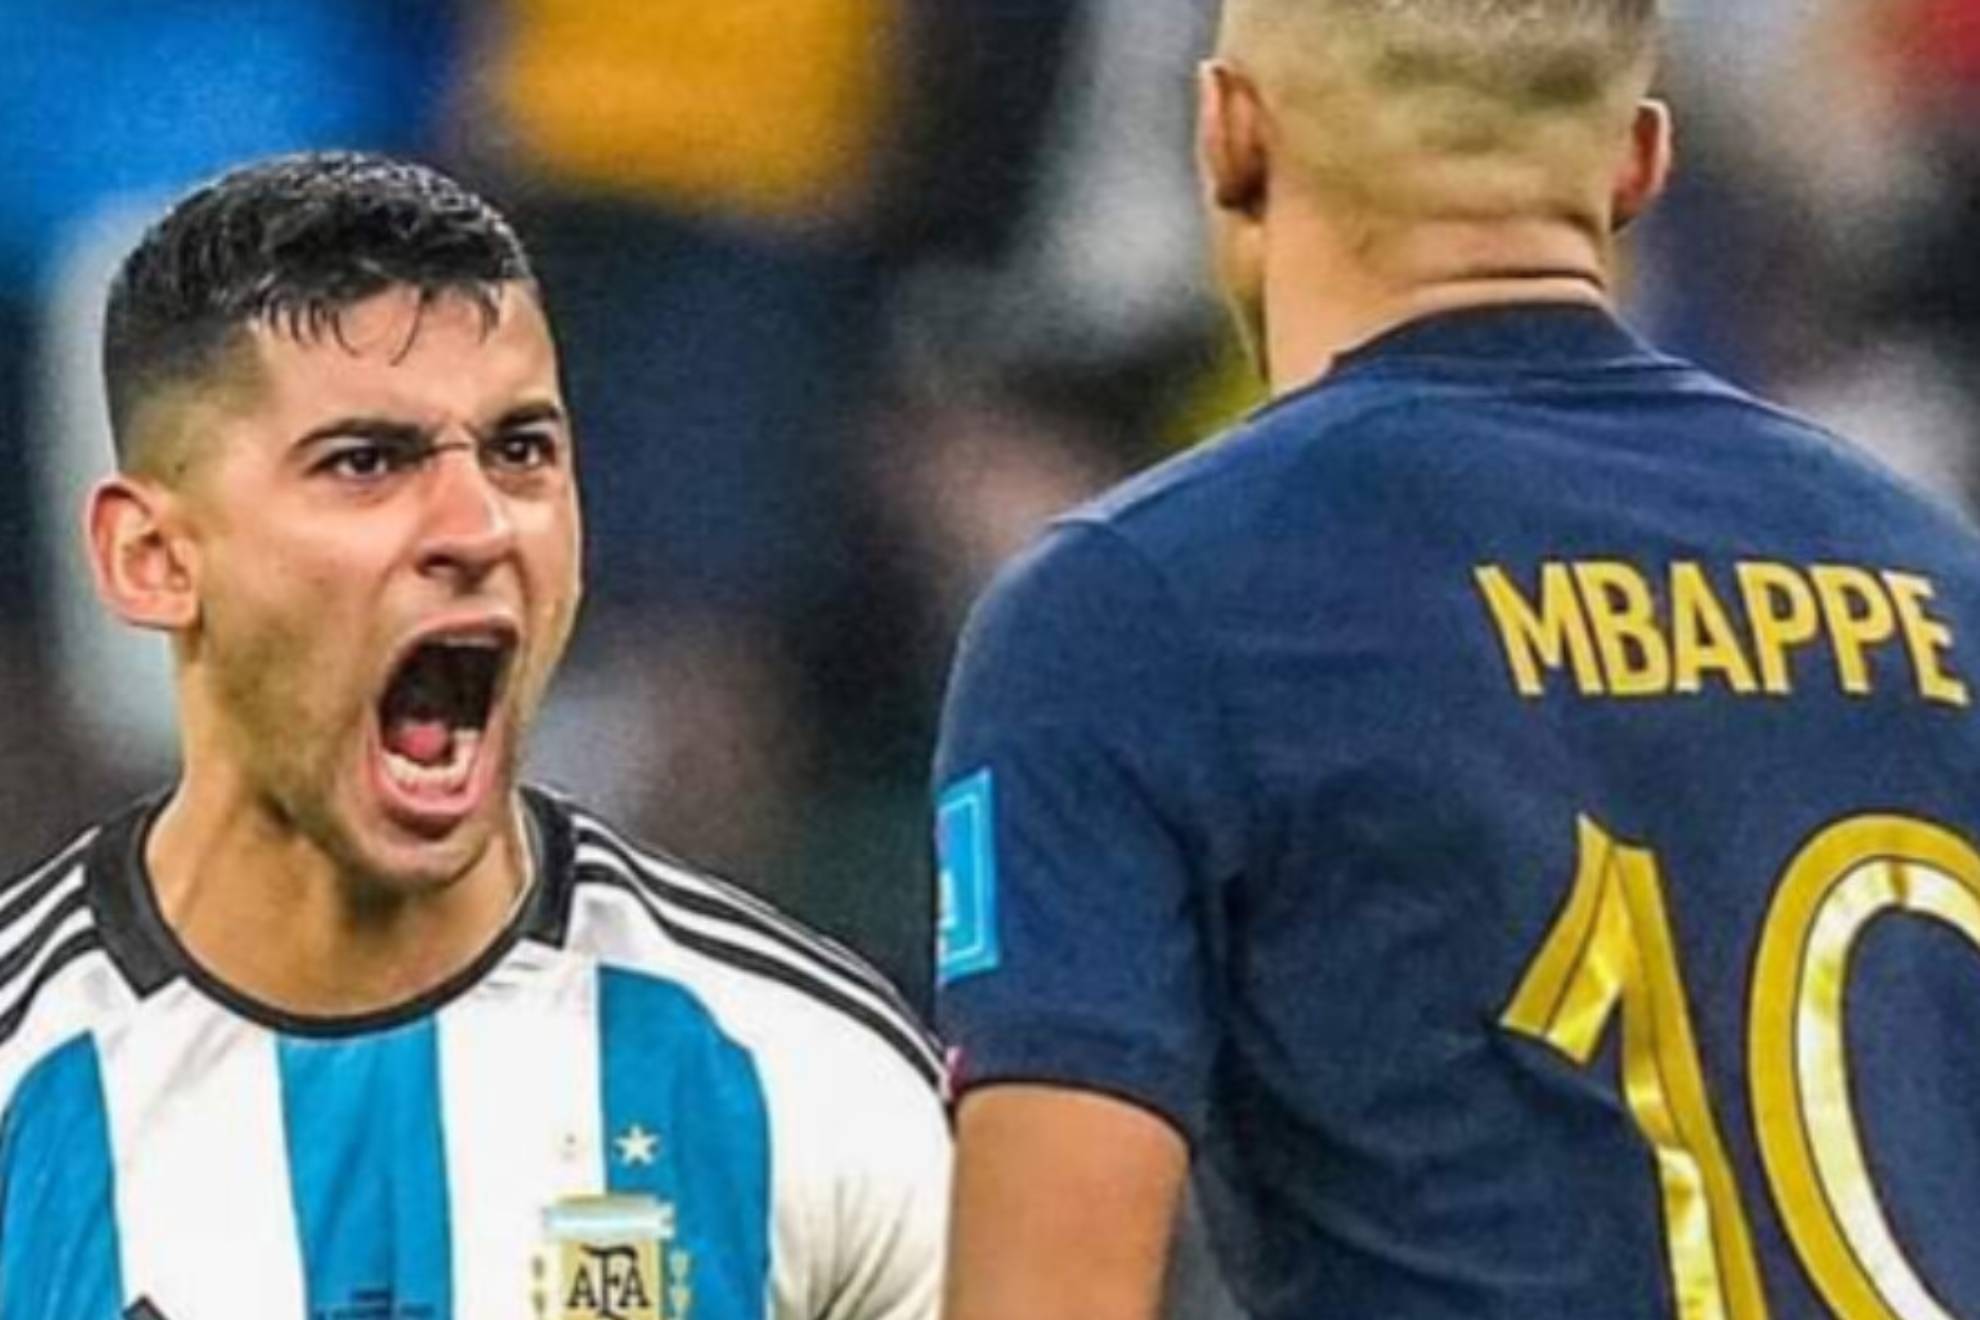 Cuti Romero reveals why he celebrated Messi's goal in Mbappe's face in the World Cup final